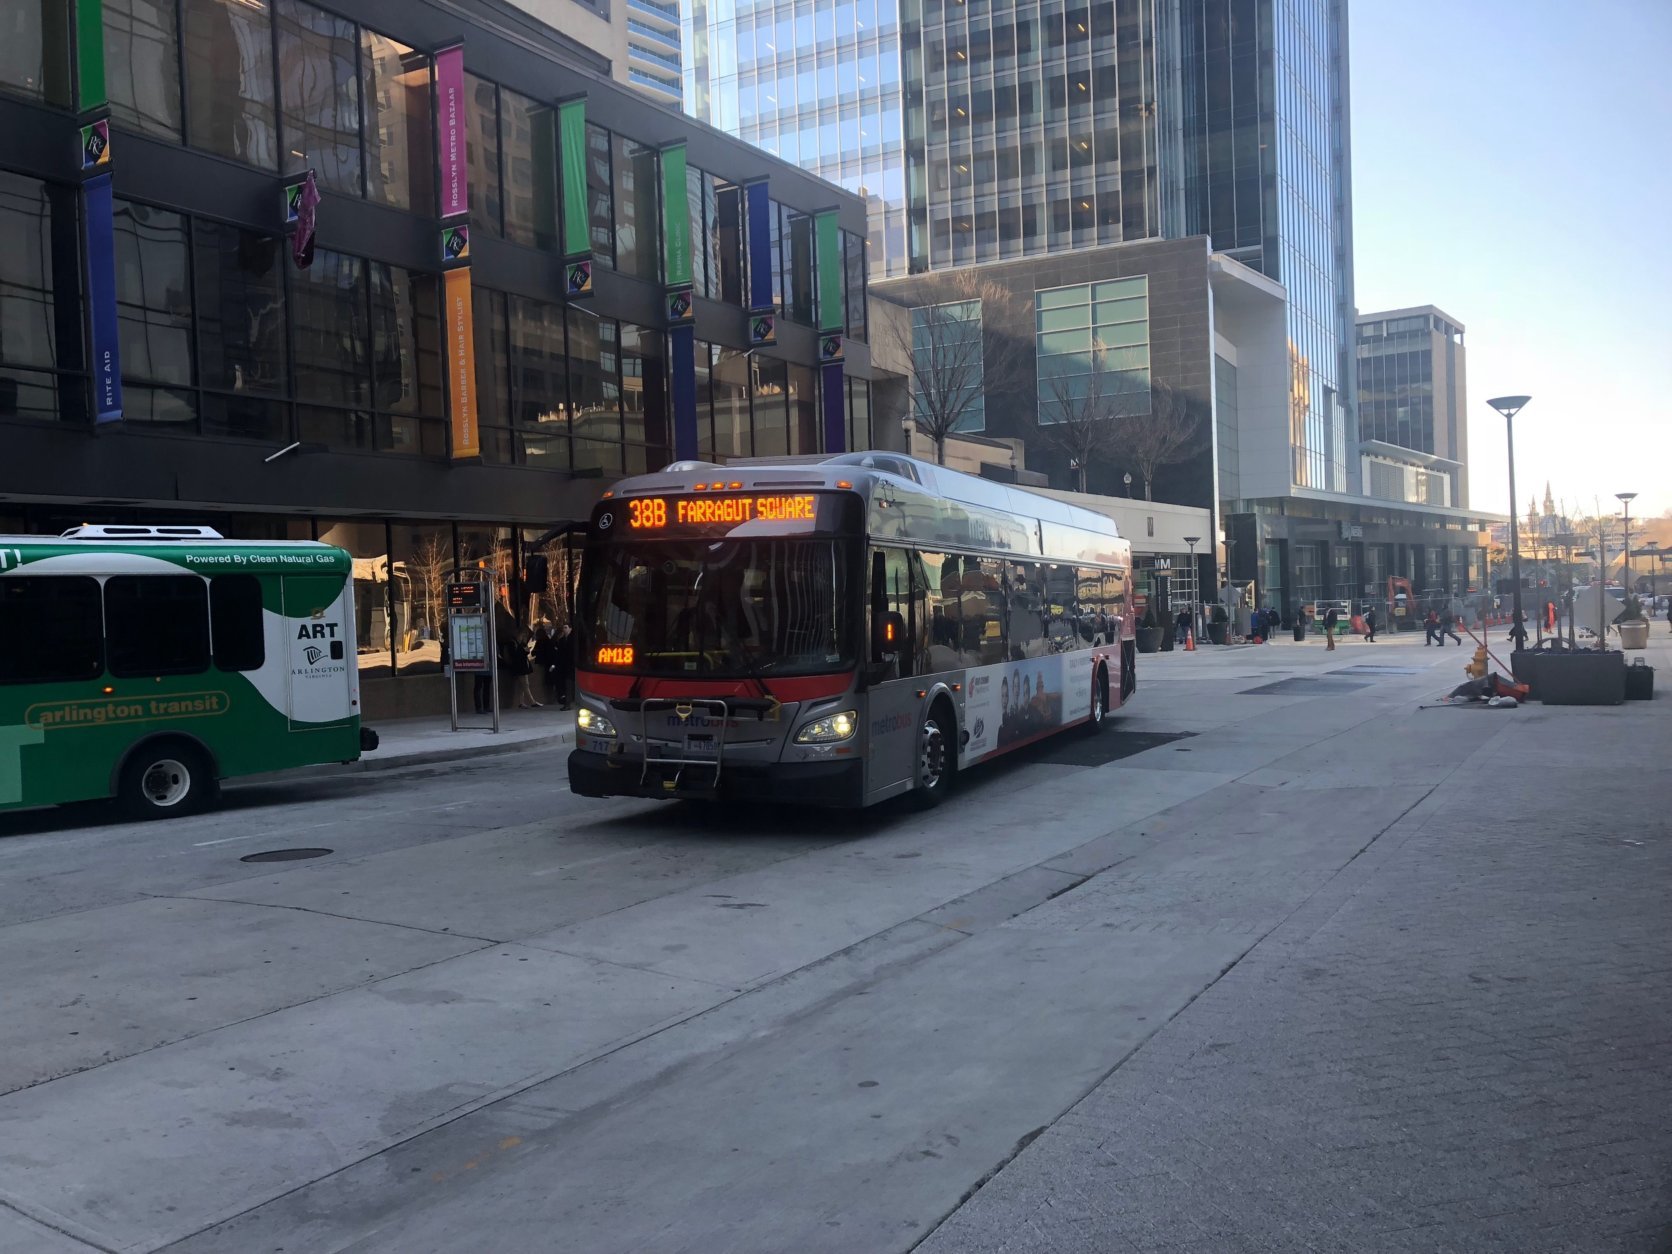 Metrobuses like the 38B have had to loop around onto Wilson Boulevard and other roads, adding to traffic delays and operational costs ever since construction ramped up several years ago. (WTOP/Max Smith)